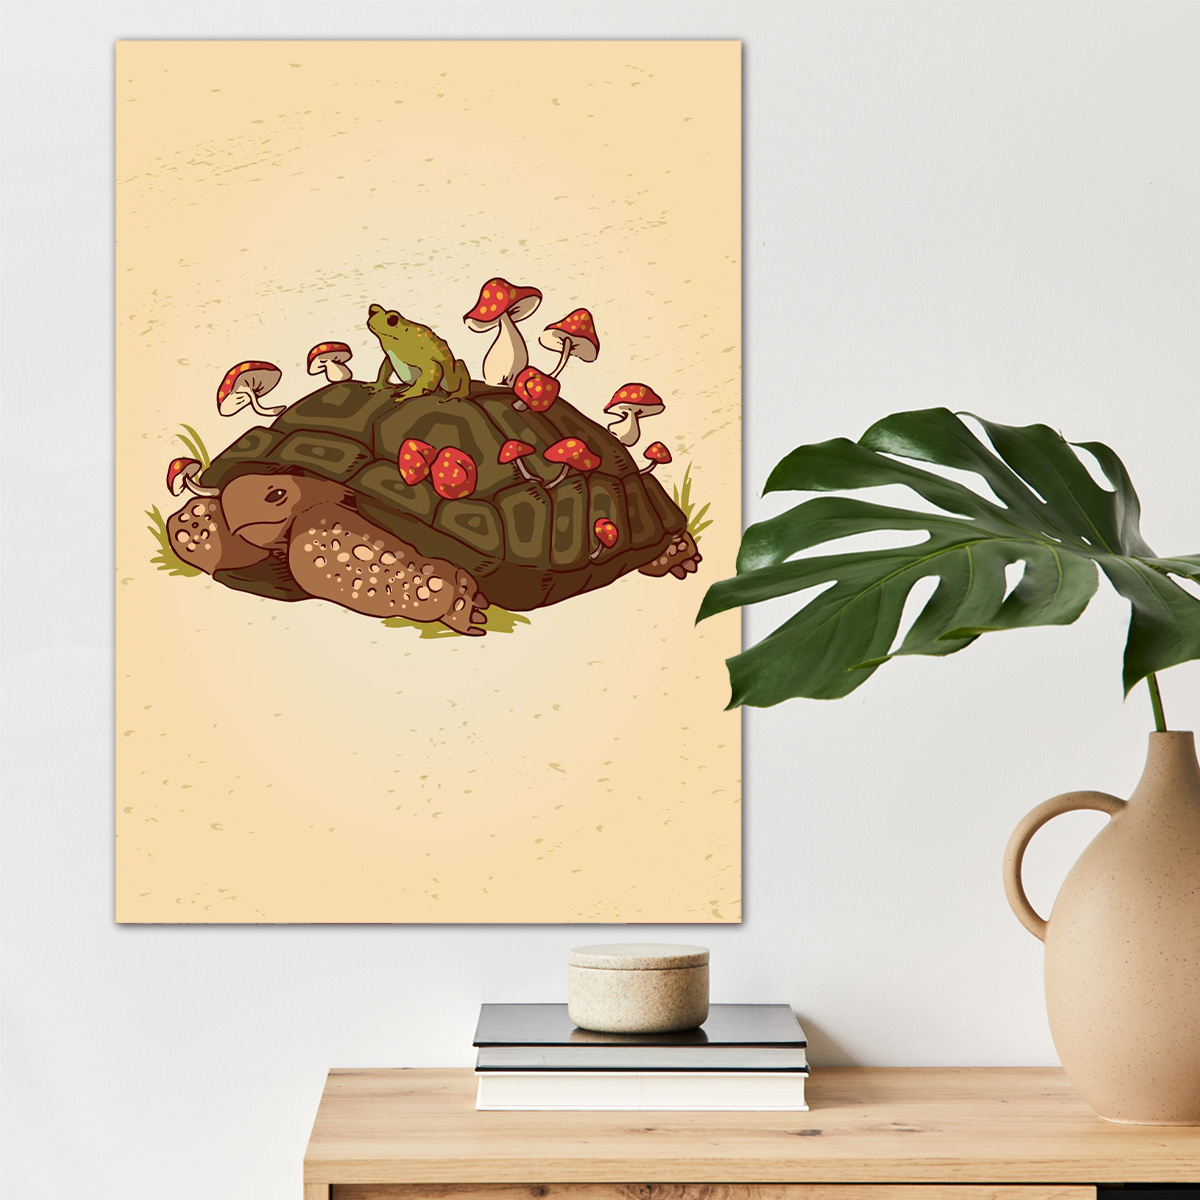 

1pc Tortoise Frog Canvas Wall Art For Home Decor, Cottagecore Poster Wall Decor, Canvas Prints For Living Room Bedroom Kitchen Office Cafe Decor, Perfect Gift And Decoration